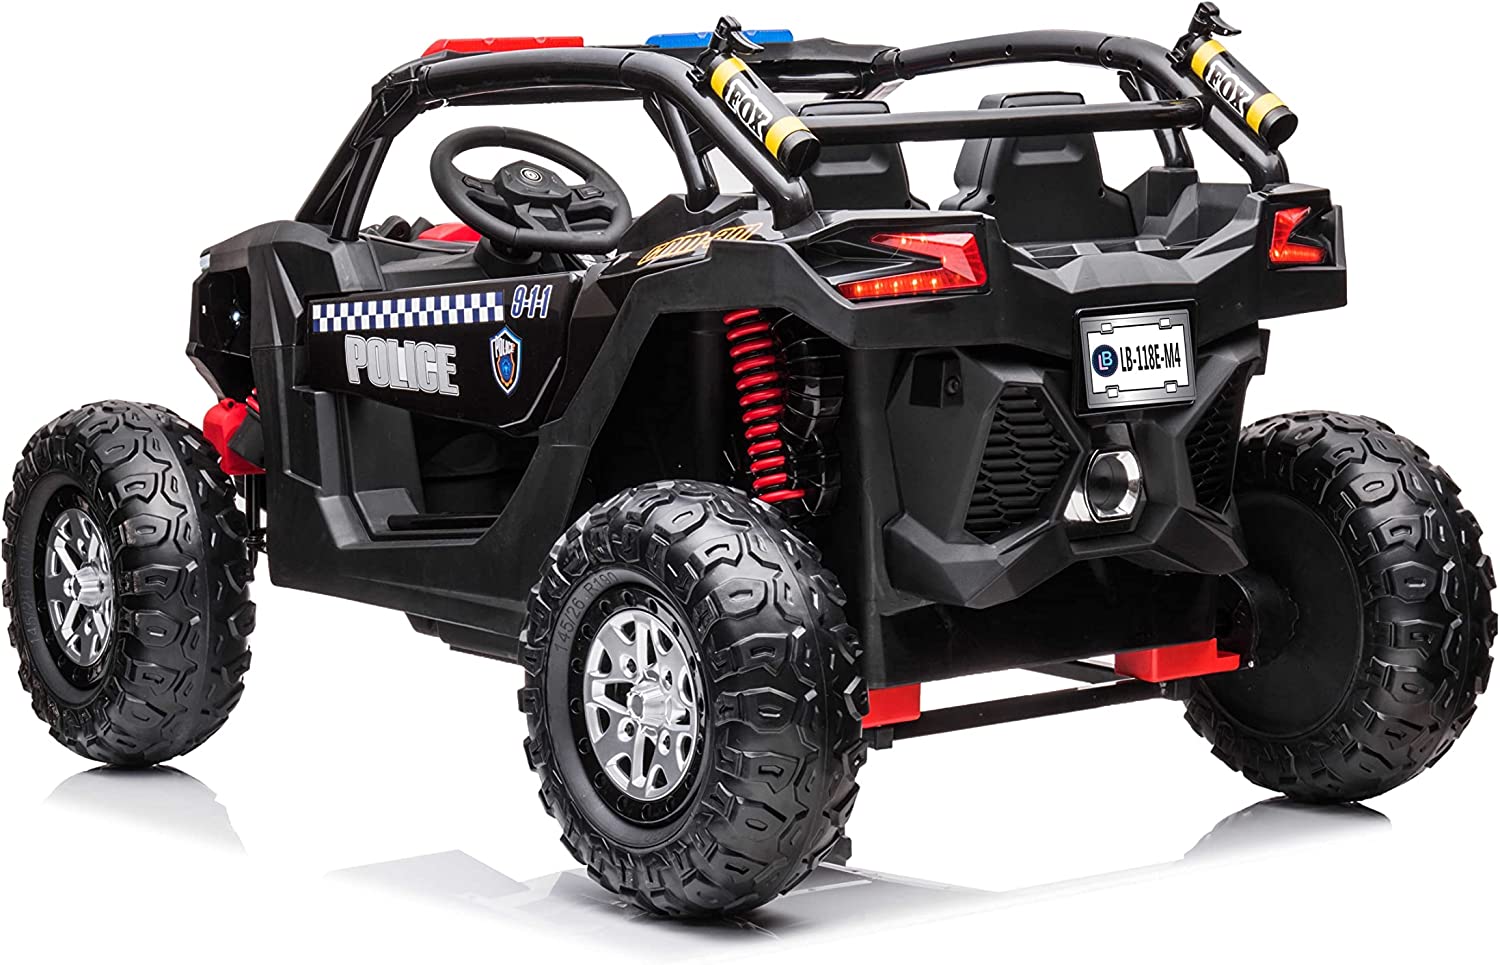 Lovely Baby Powered Riding Jeep For Kids LB 118E, Police (M4) (Black)